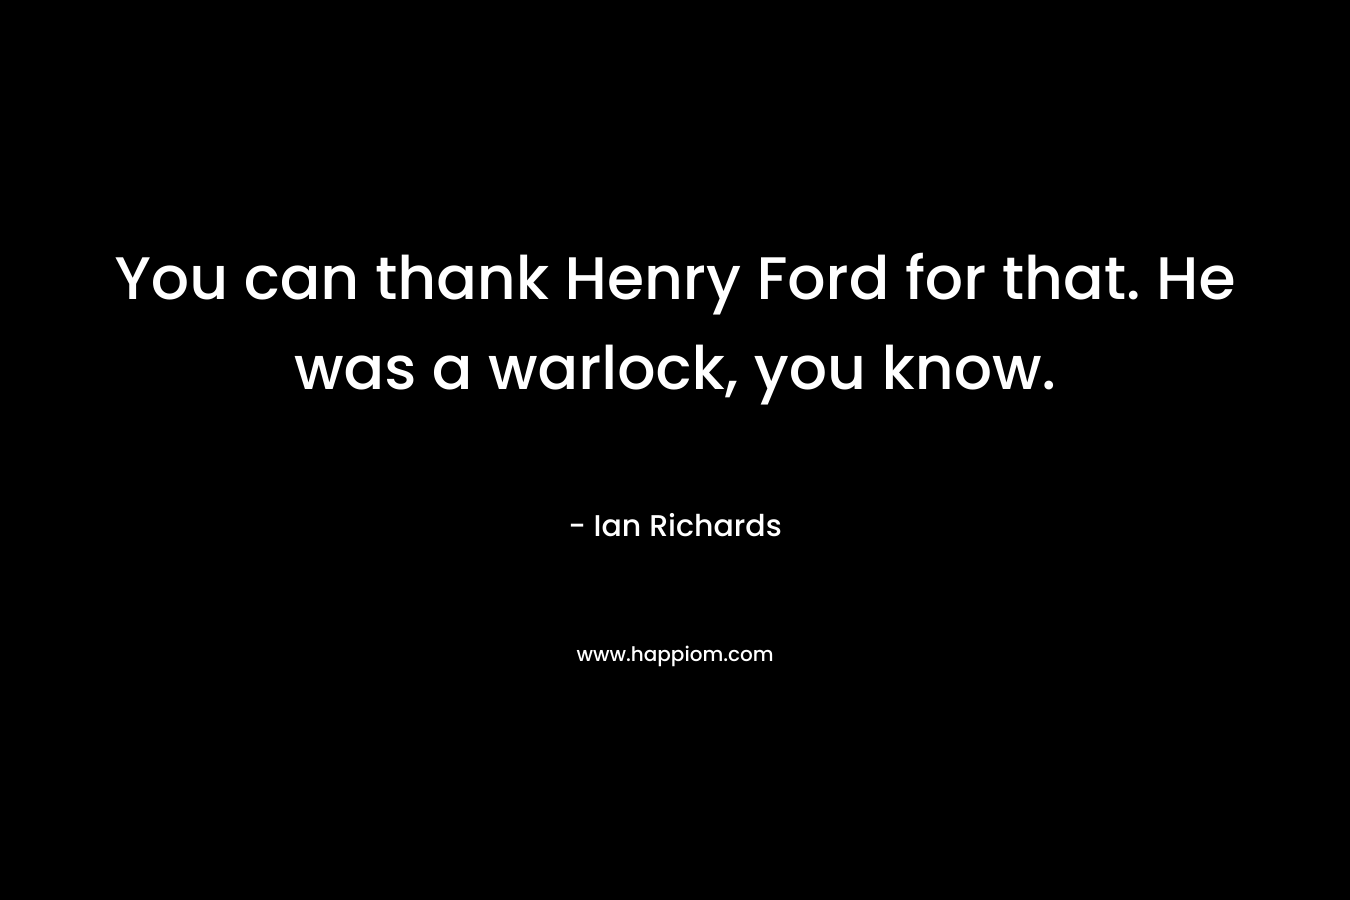 You can thank Henry Ford for that. He was a warlock, you know. – Ian Richards